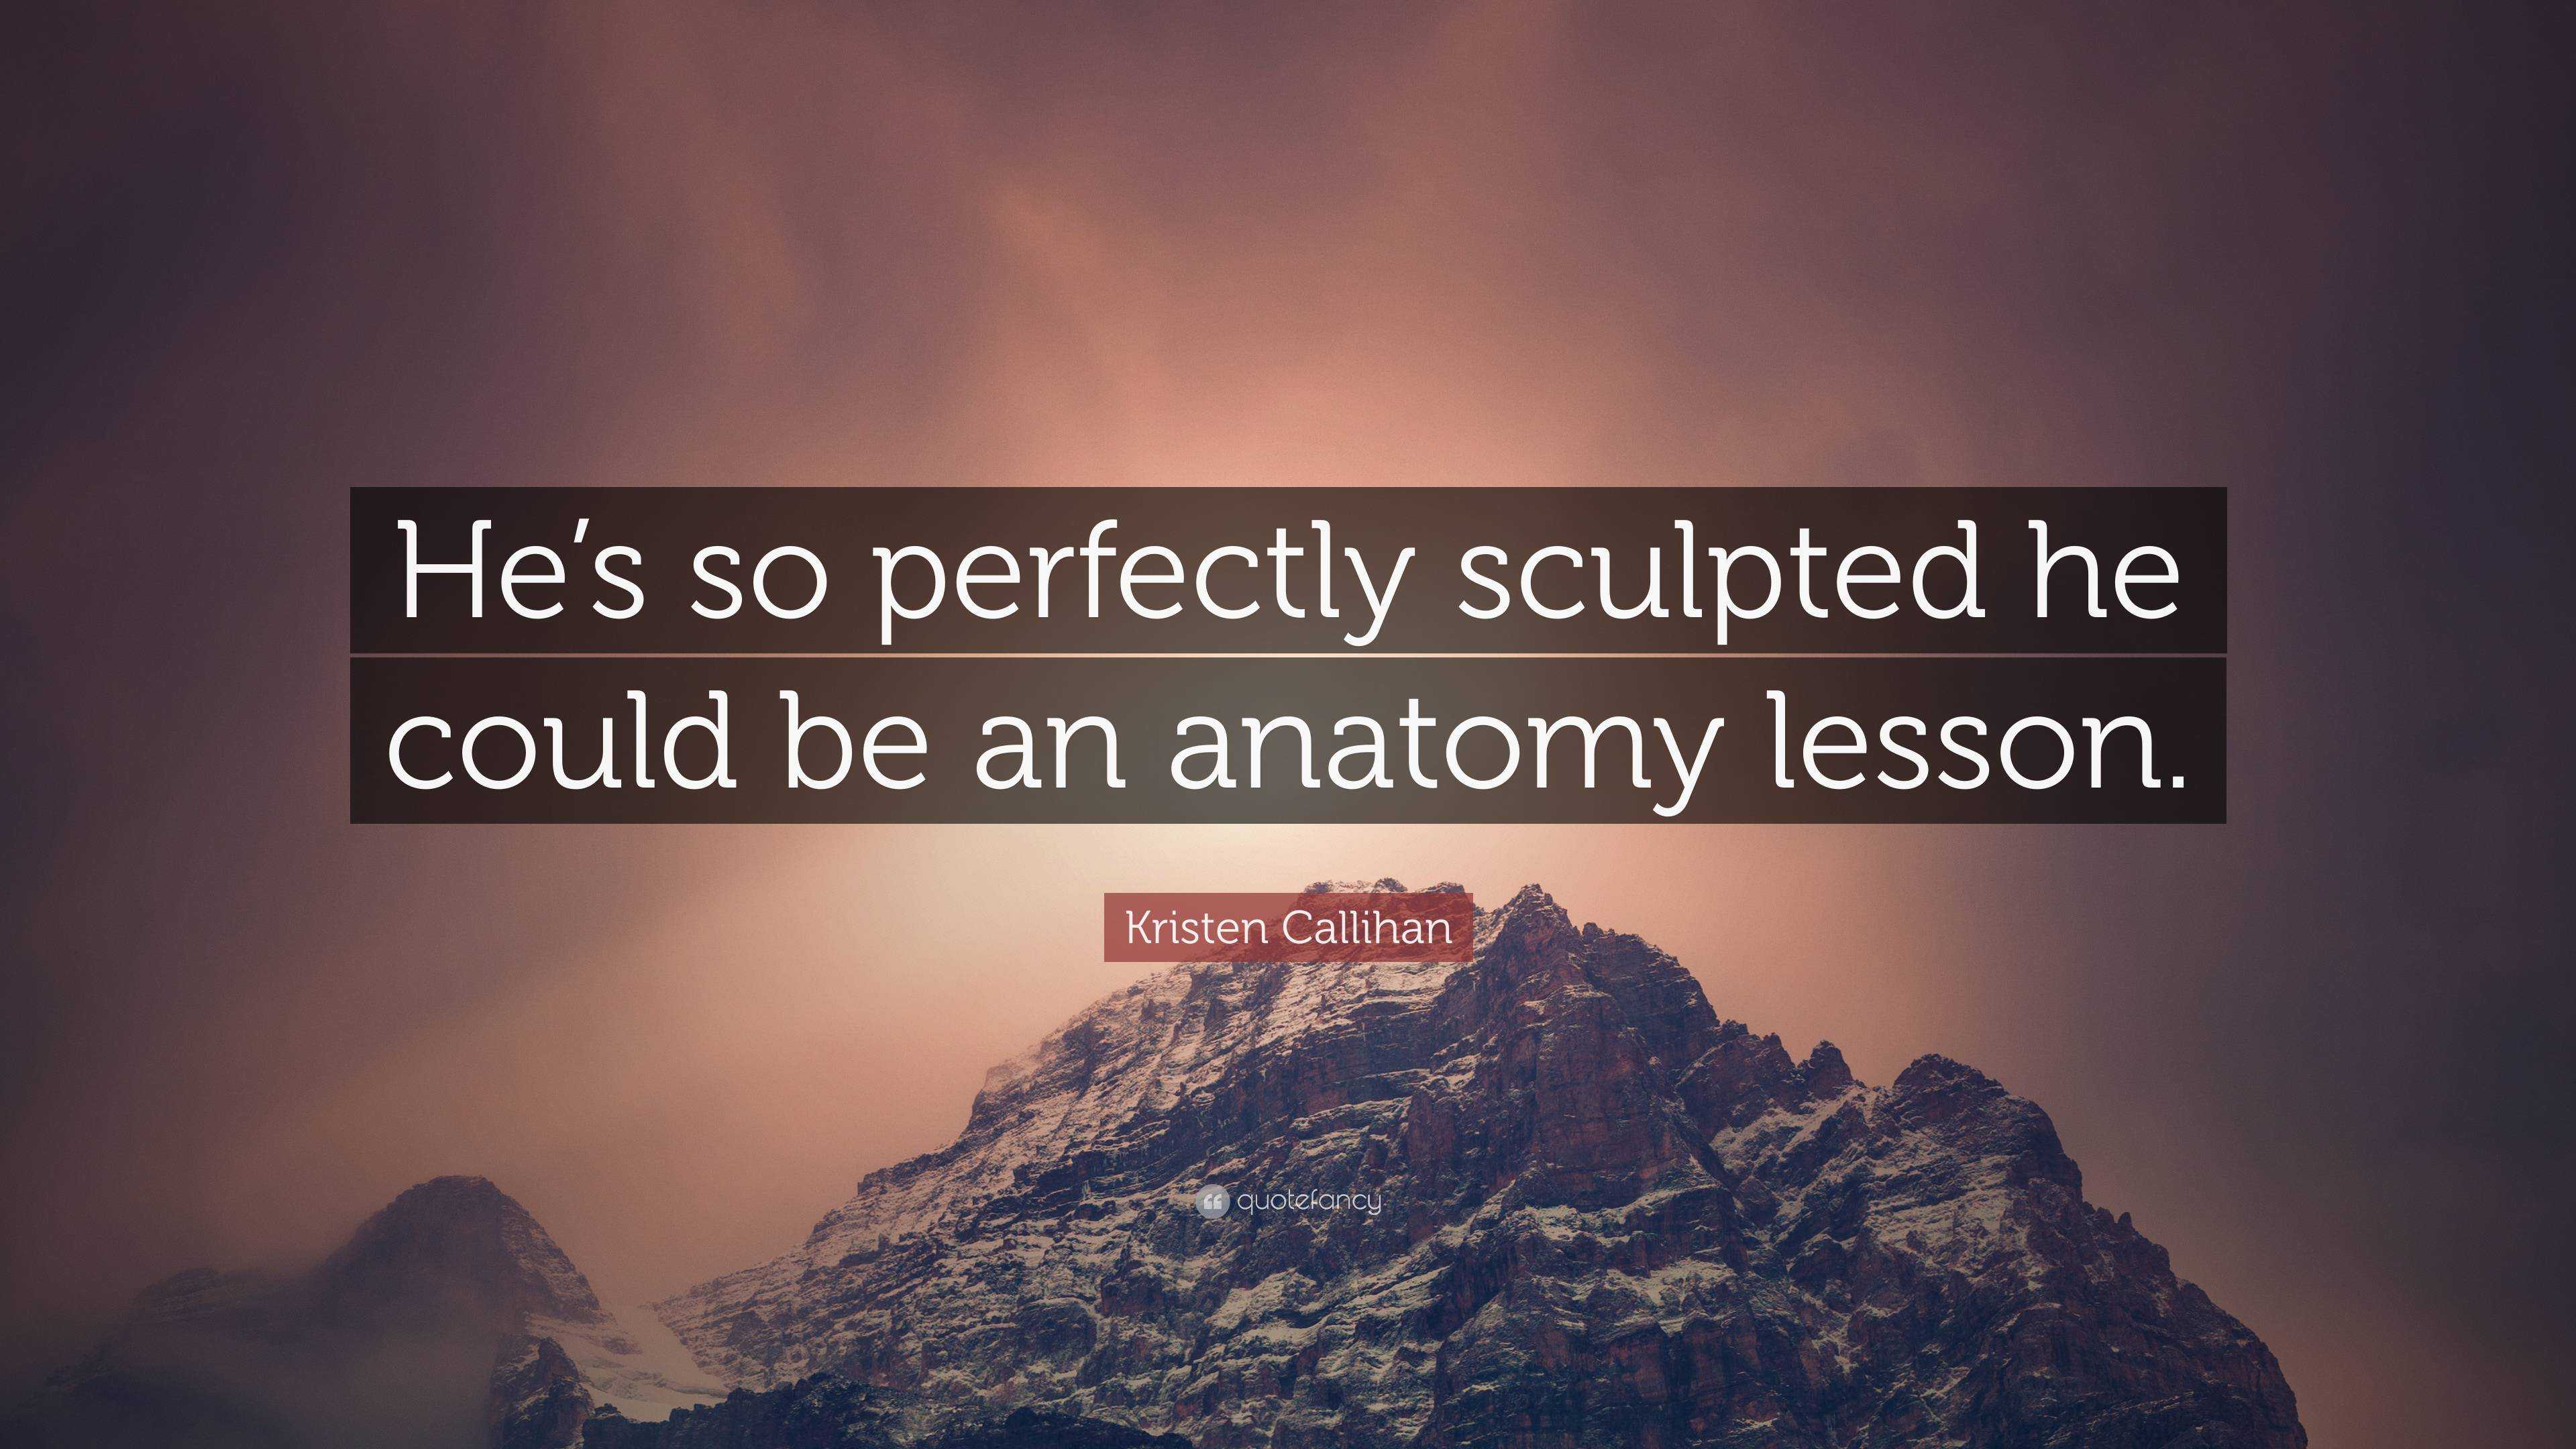 Kristen Callihan Quote: “He's so perfectly sculpted he could be an anatomy  lesson.”